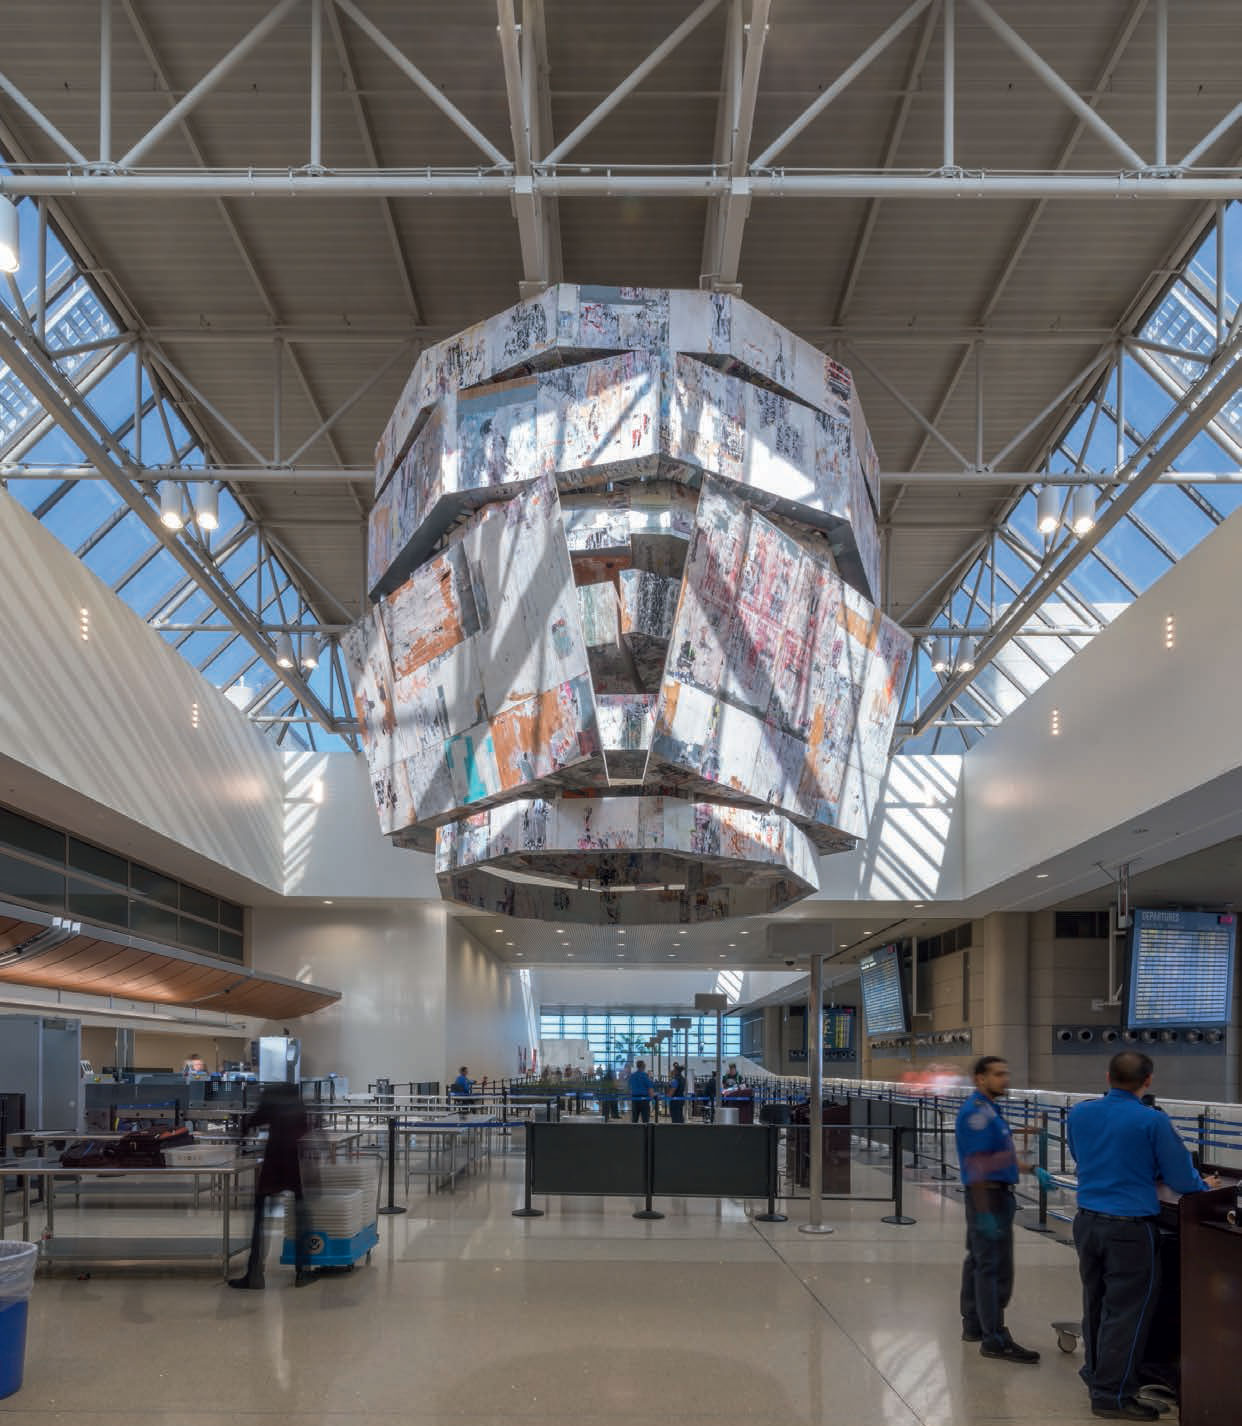 Bell Tower (2014) by Mark Bradford. Installation view at Los Angeles International Airport. As reproduced in our new Contemporary Artist Series book